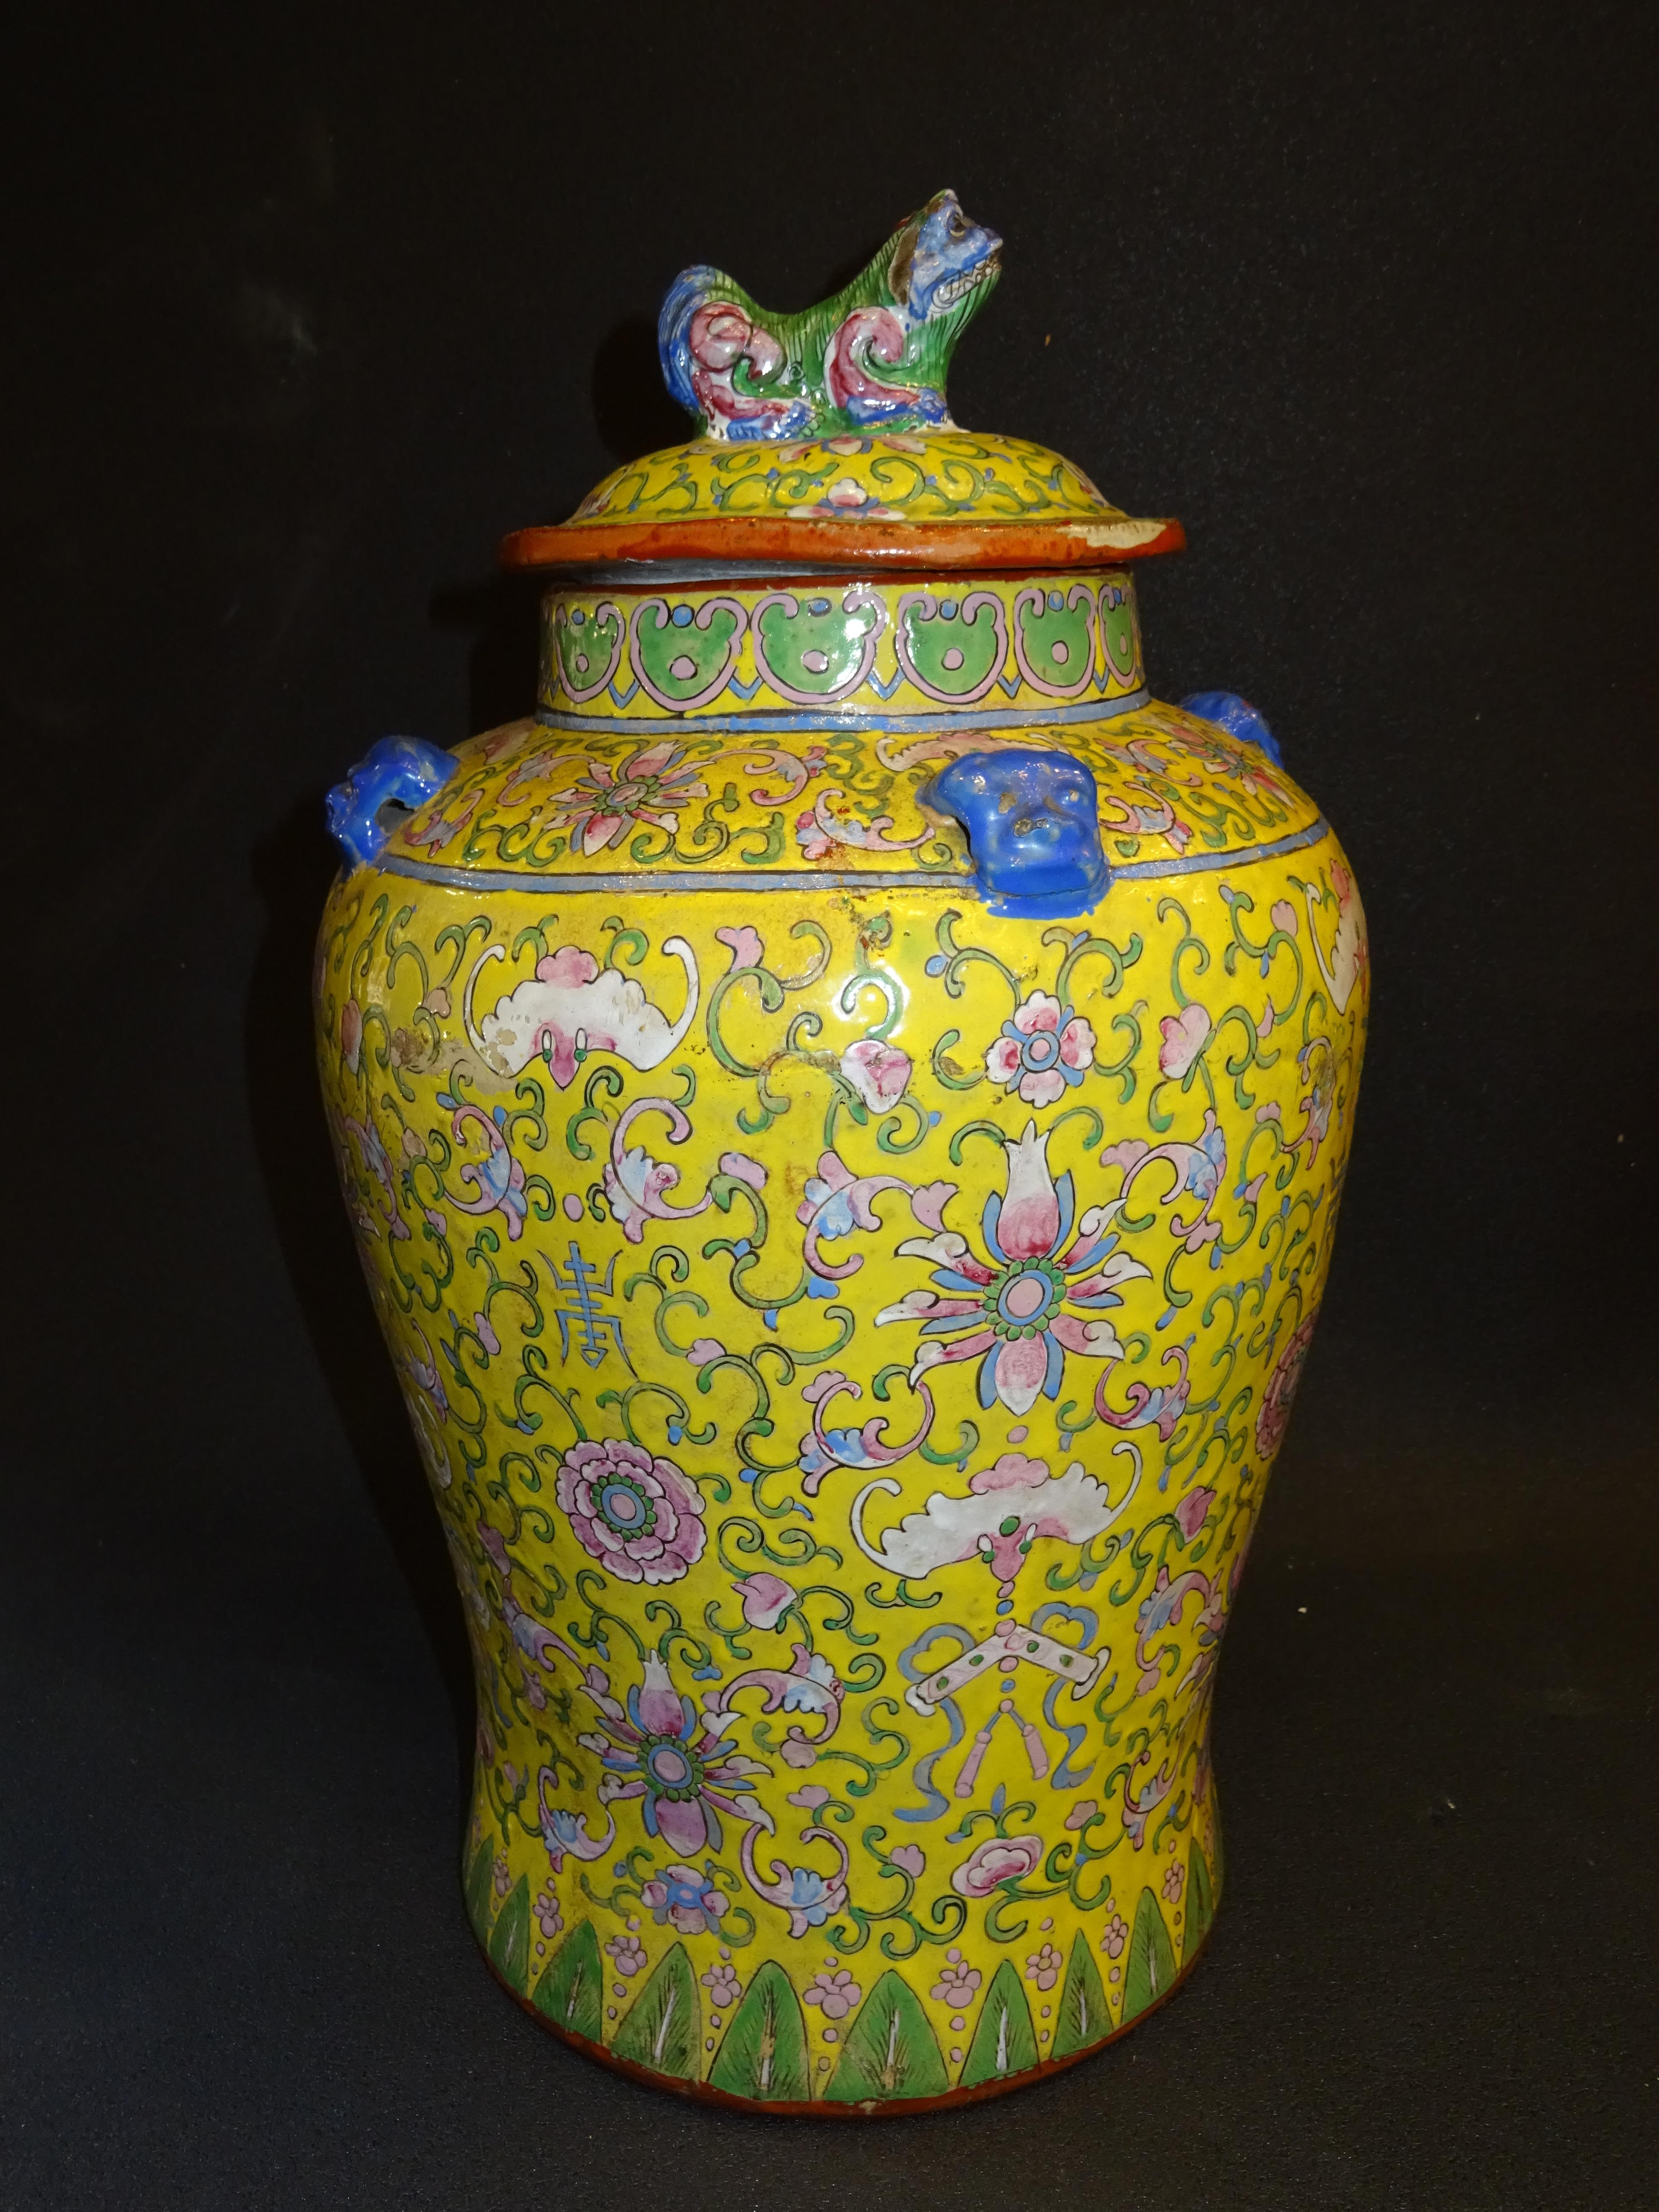 One of a kind Chinese ceramic vase with a foo lion lid. On a marvelous yellow, hand painted chrysanthemums, peonies or different Chinese symbols in shades of pink, green and blue.
It has an amazing lid with a foo lion on the top, there is also 3